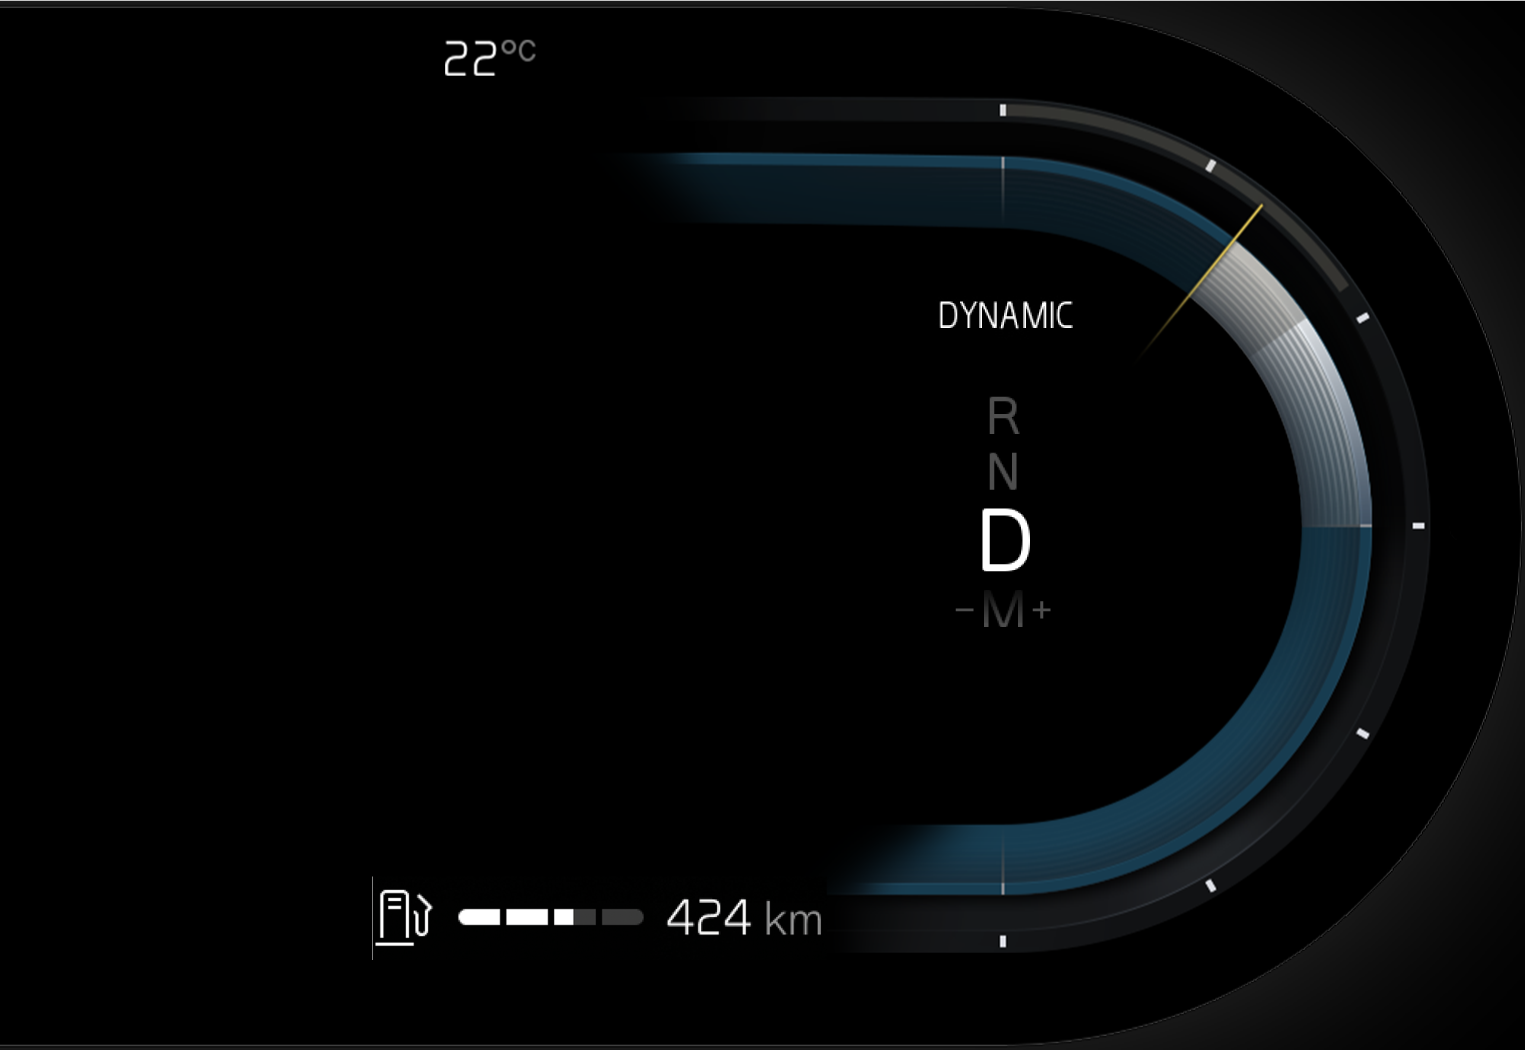 P5-22w22-iCup-Drive mode in driver display non hybrids